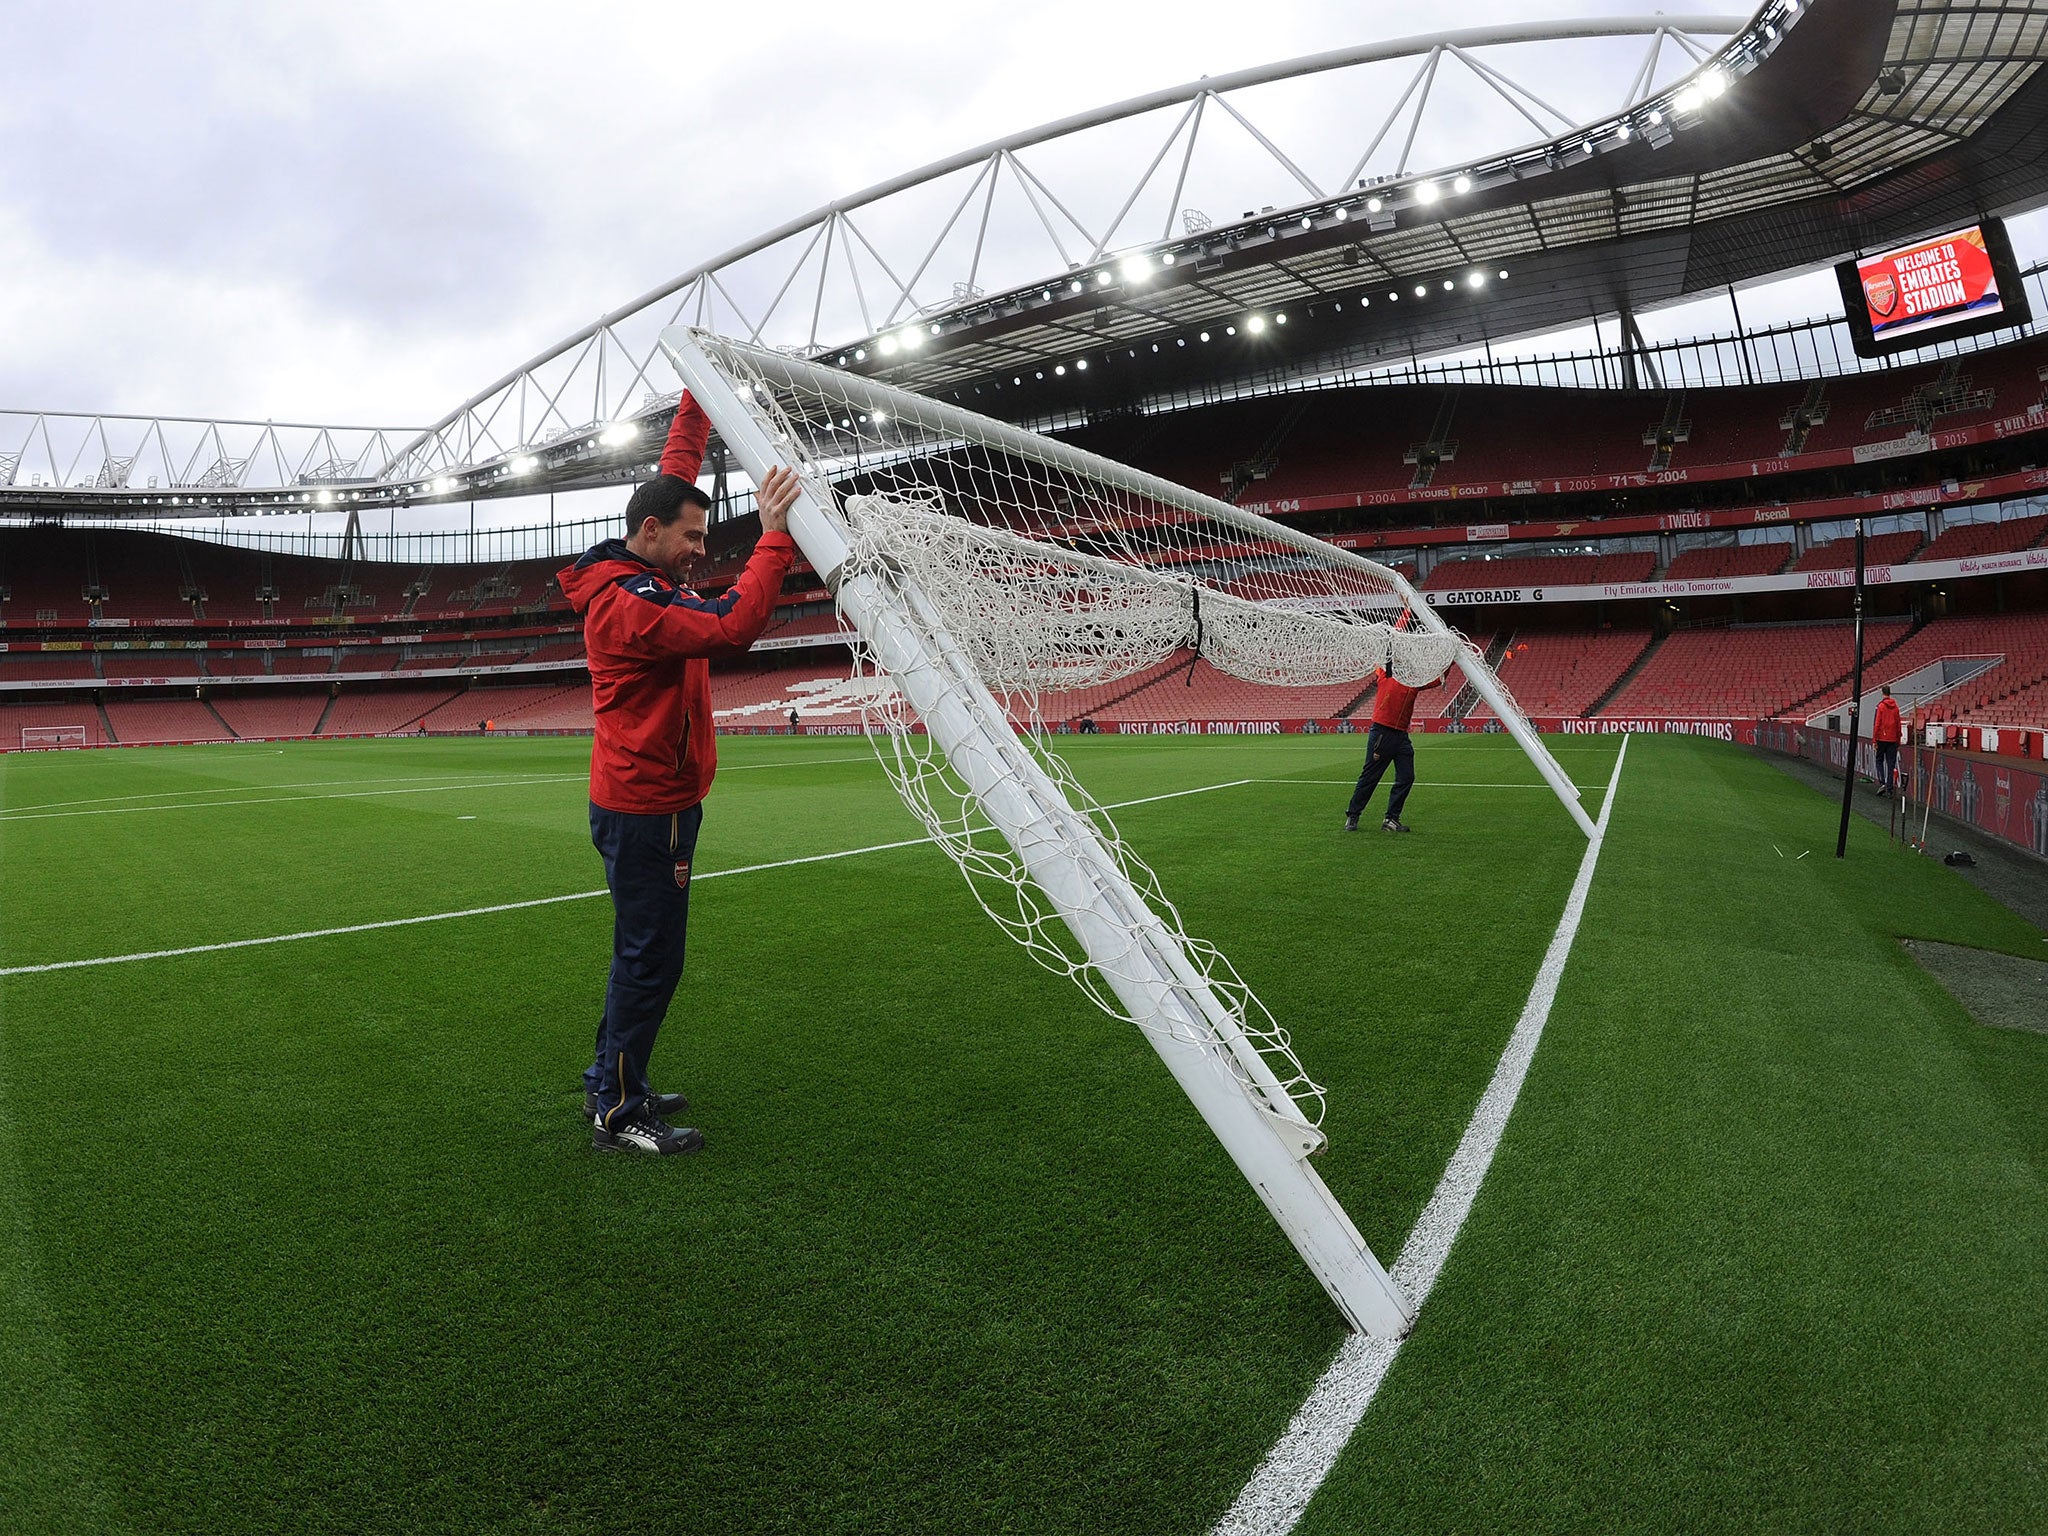 Final preparations are carried out at the Emirates ahead of Arsenal vs Sunderland